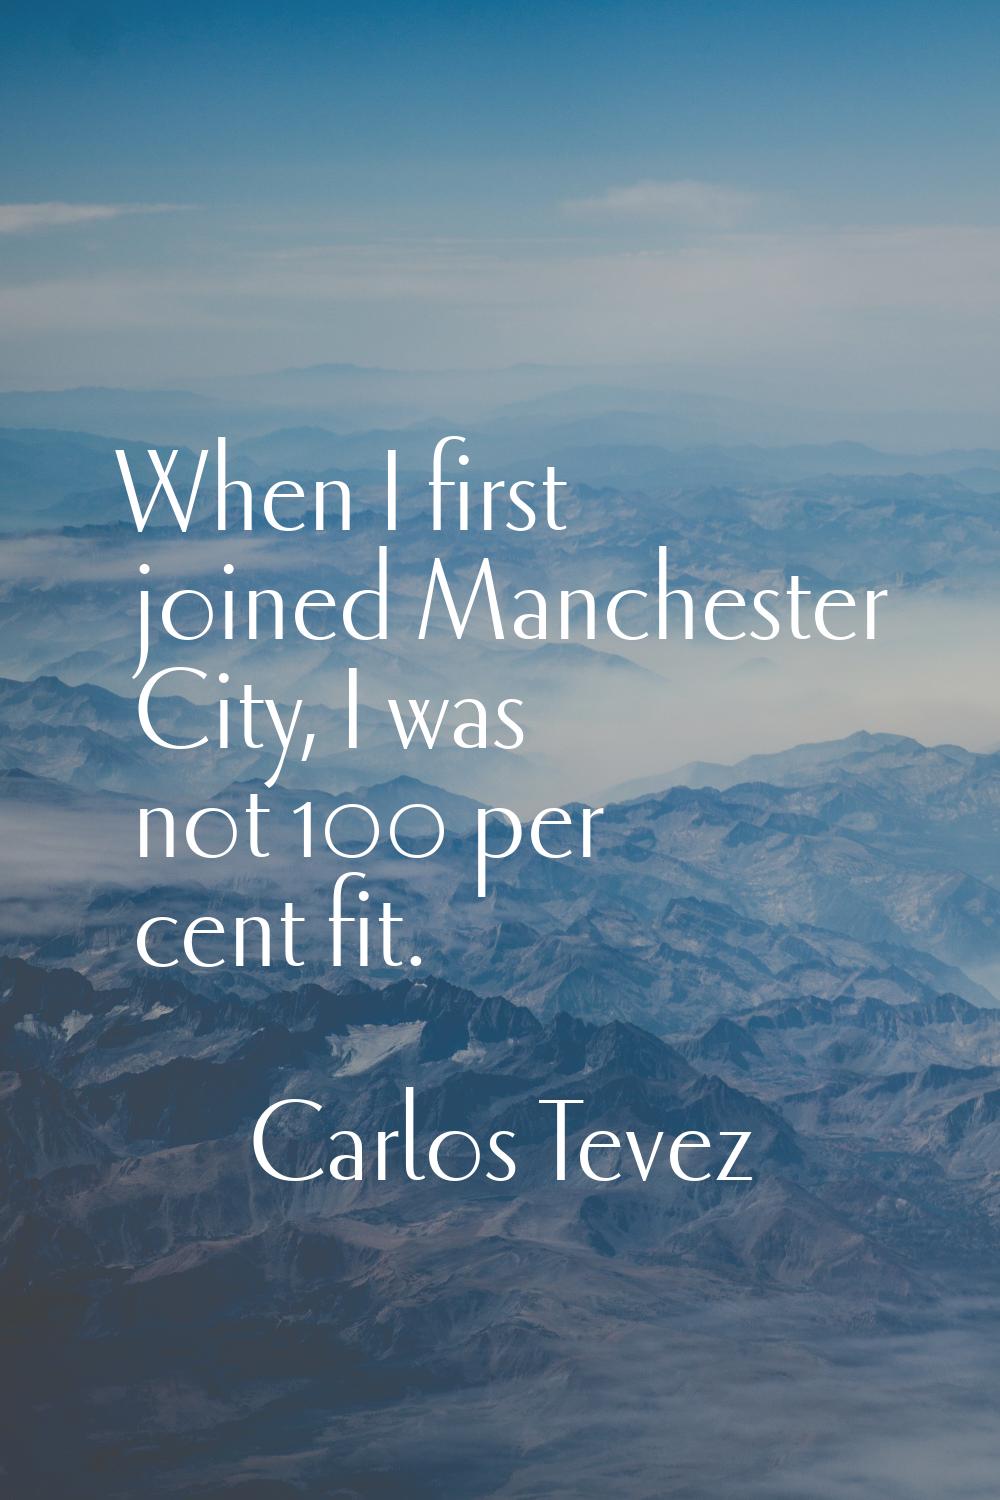 When I first joined Manchester City, I was not 100 per cent fit.